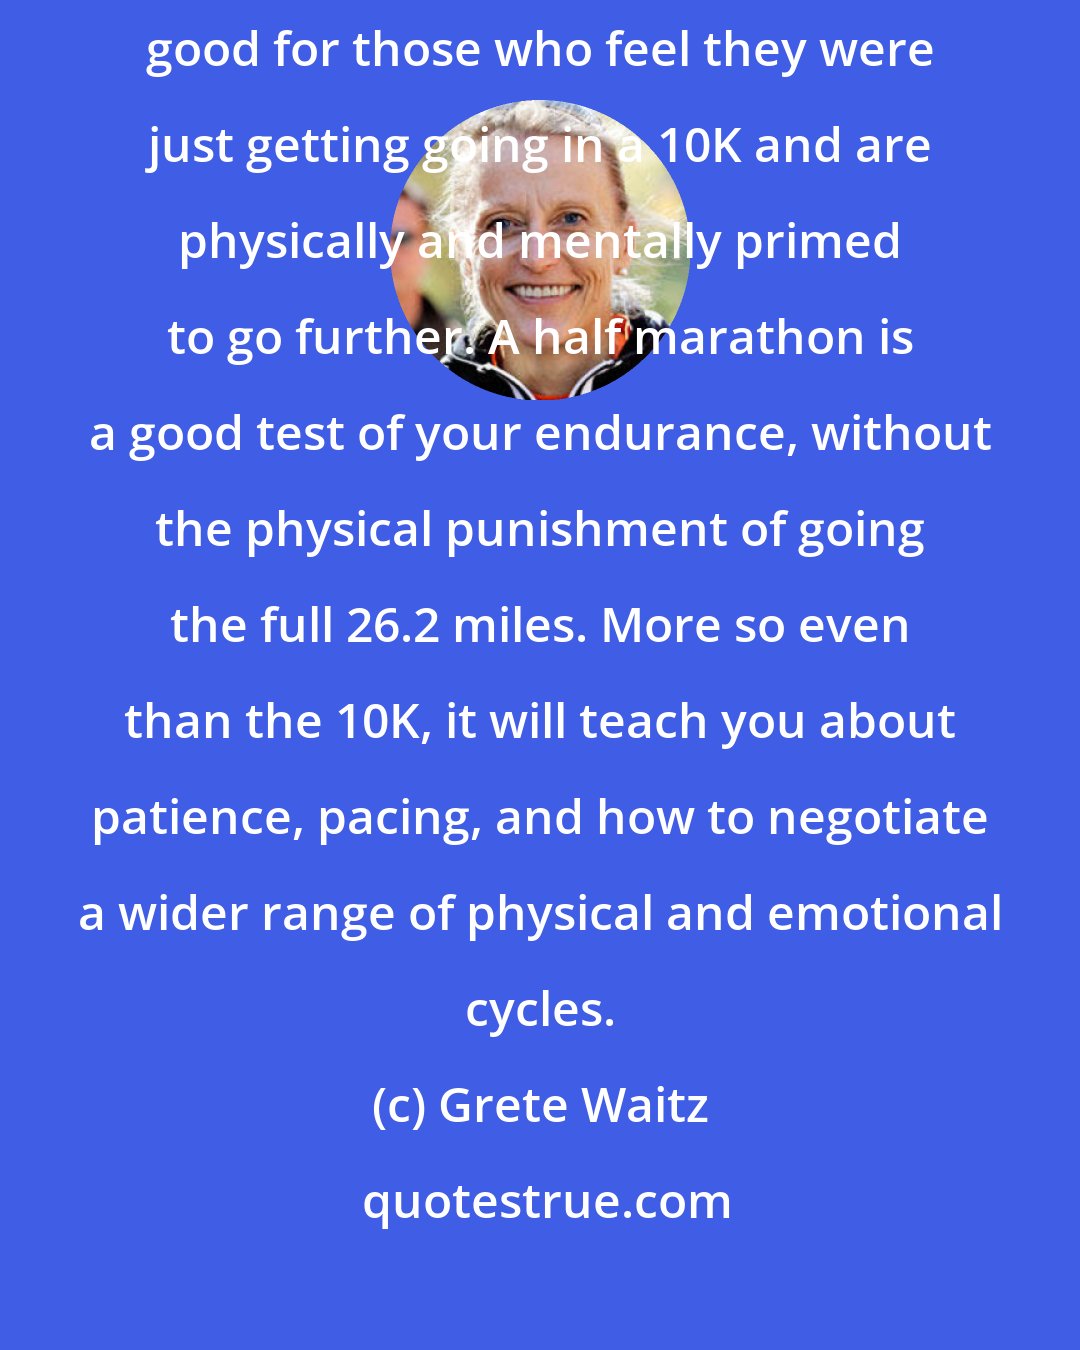 Grete Waitz: Not only is [a half marathon] a good test for the marathon, it is also good for those who feel they were just getting going in a 10K and are physically and mentally primed to go further. A half marathon is a good test of your endurance, without the physical punishment of going the full 26.2 miles. More so even than the 10K, it will teach you about patience, pacing, and how to negotiate a wider range of physical and emotional cycles.